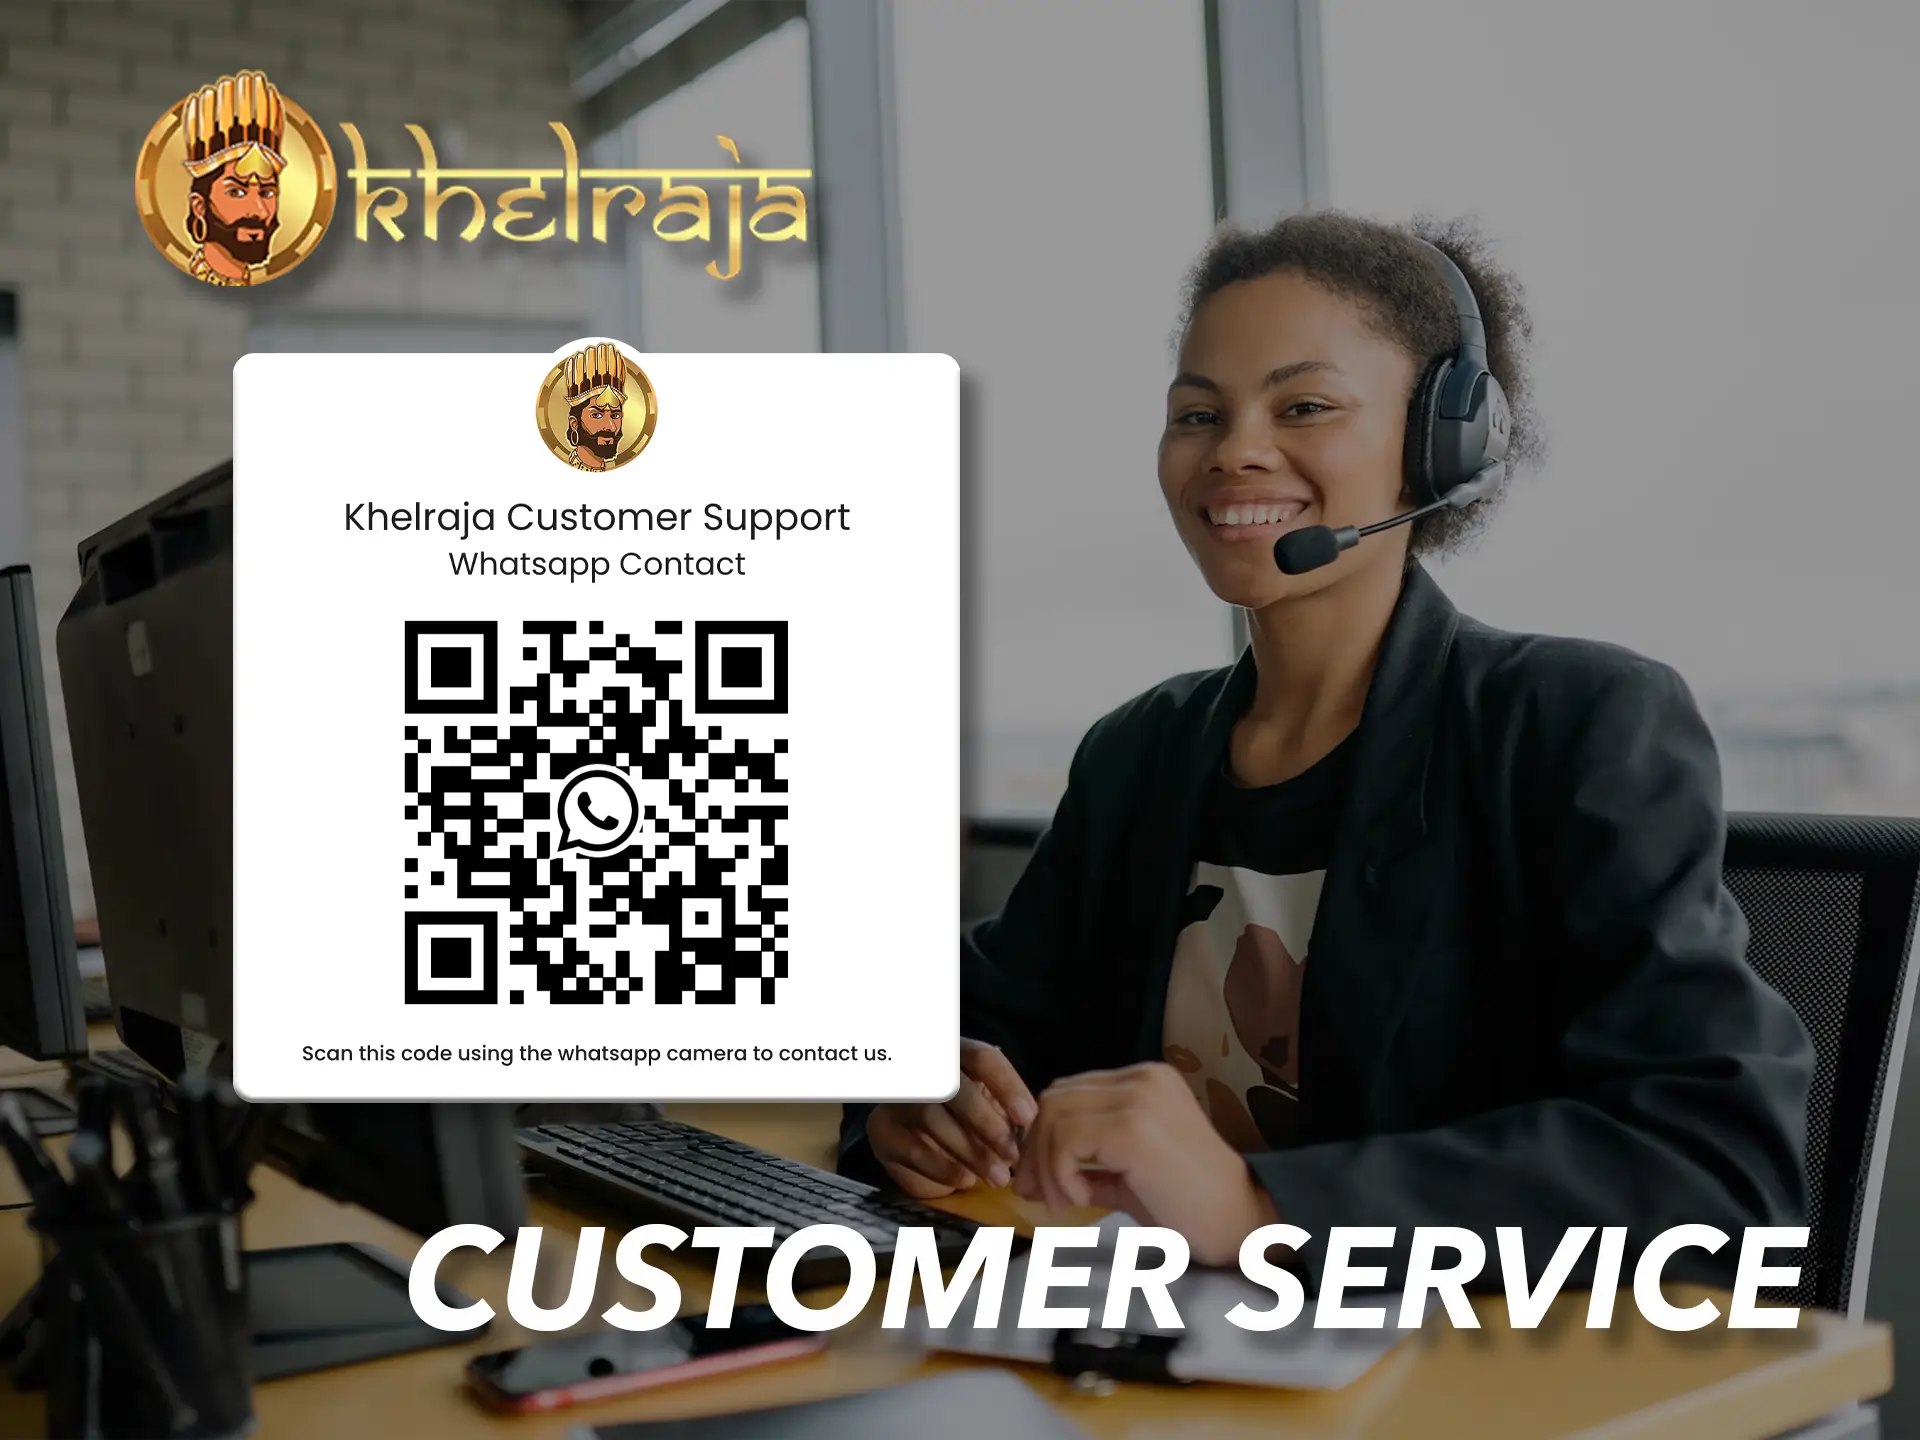 Don't worry, because any of your question can be solved by Khelraja customer support.